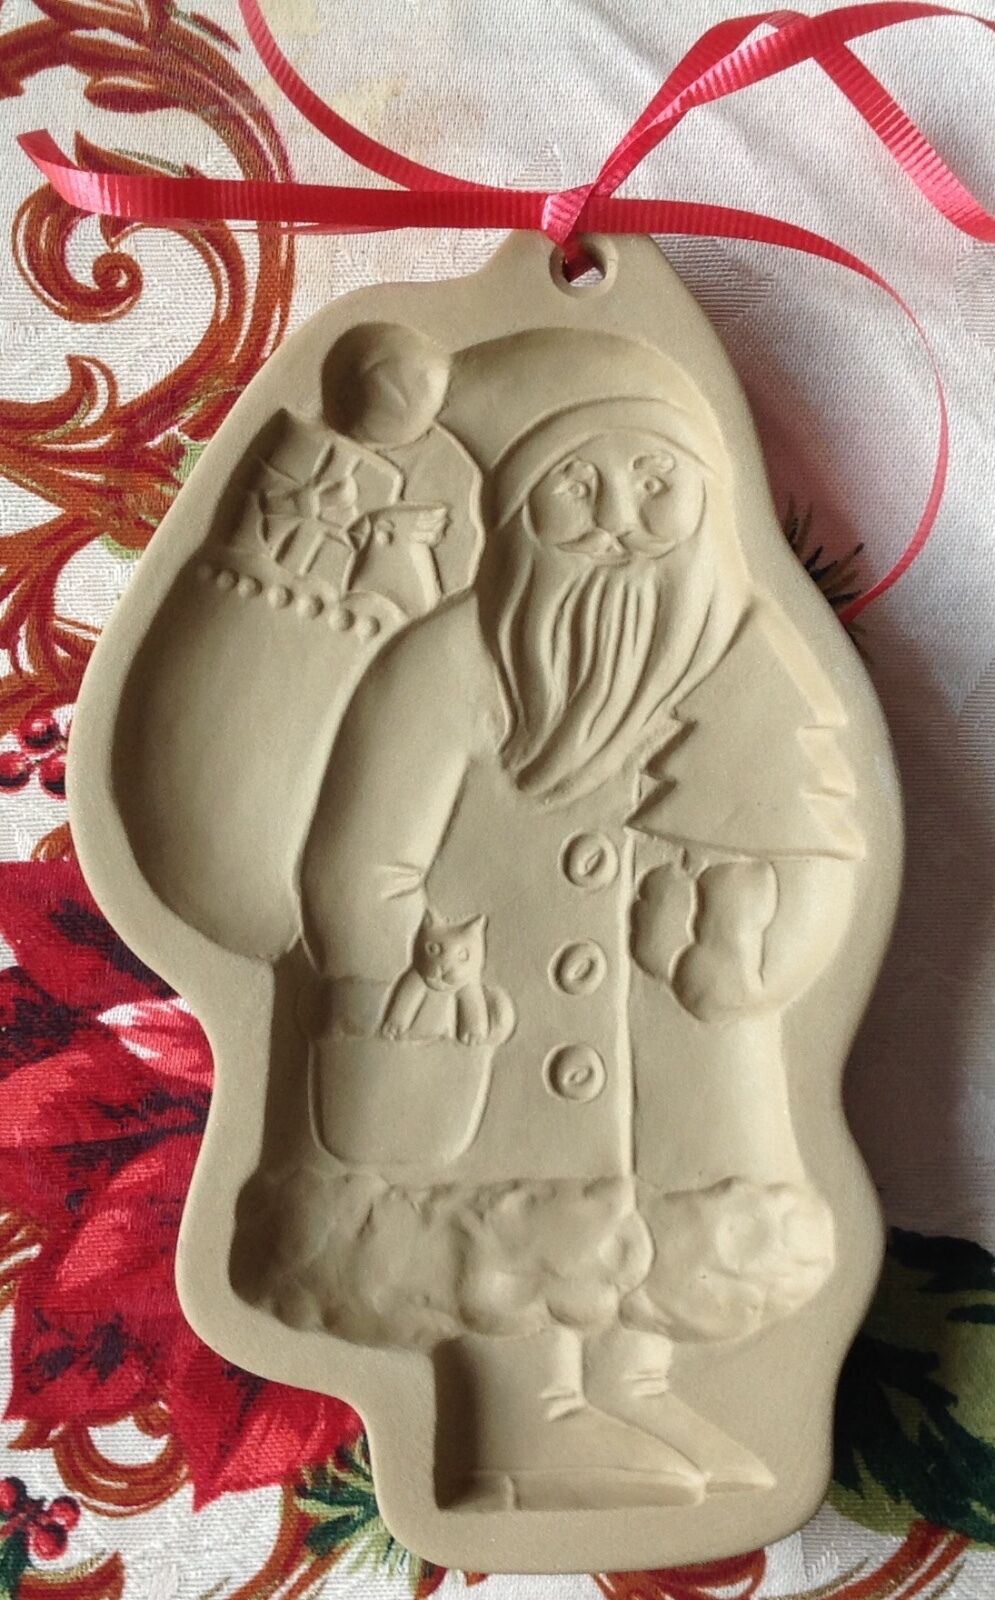 BROWN BAG COOKIE MOLD SANTA & CAT1983 RETIRED STONEWARE POTTERY COOKIE ART USA